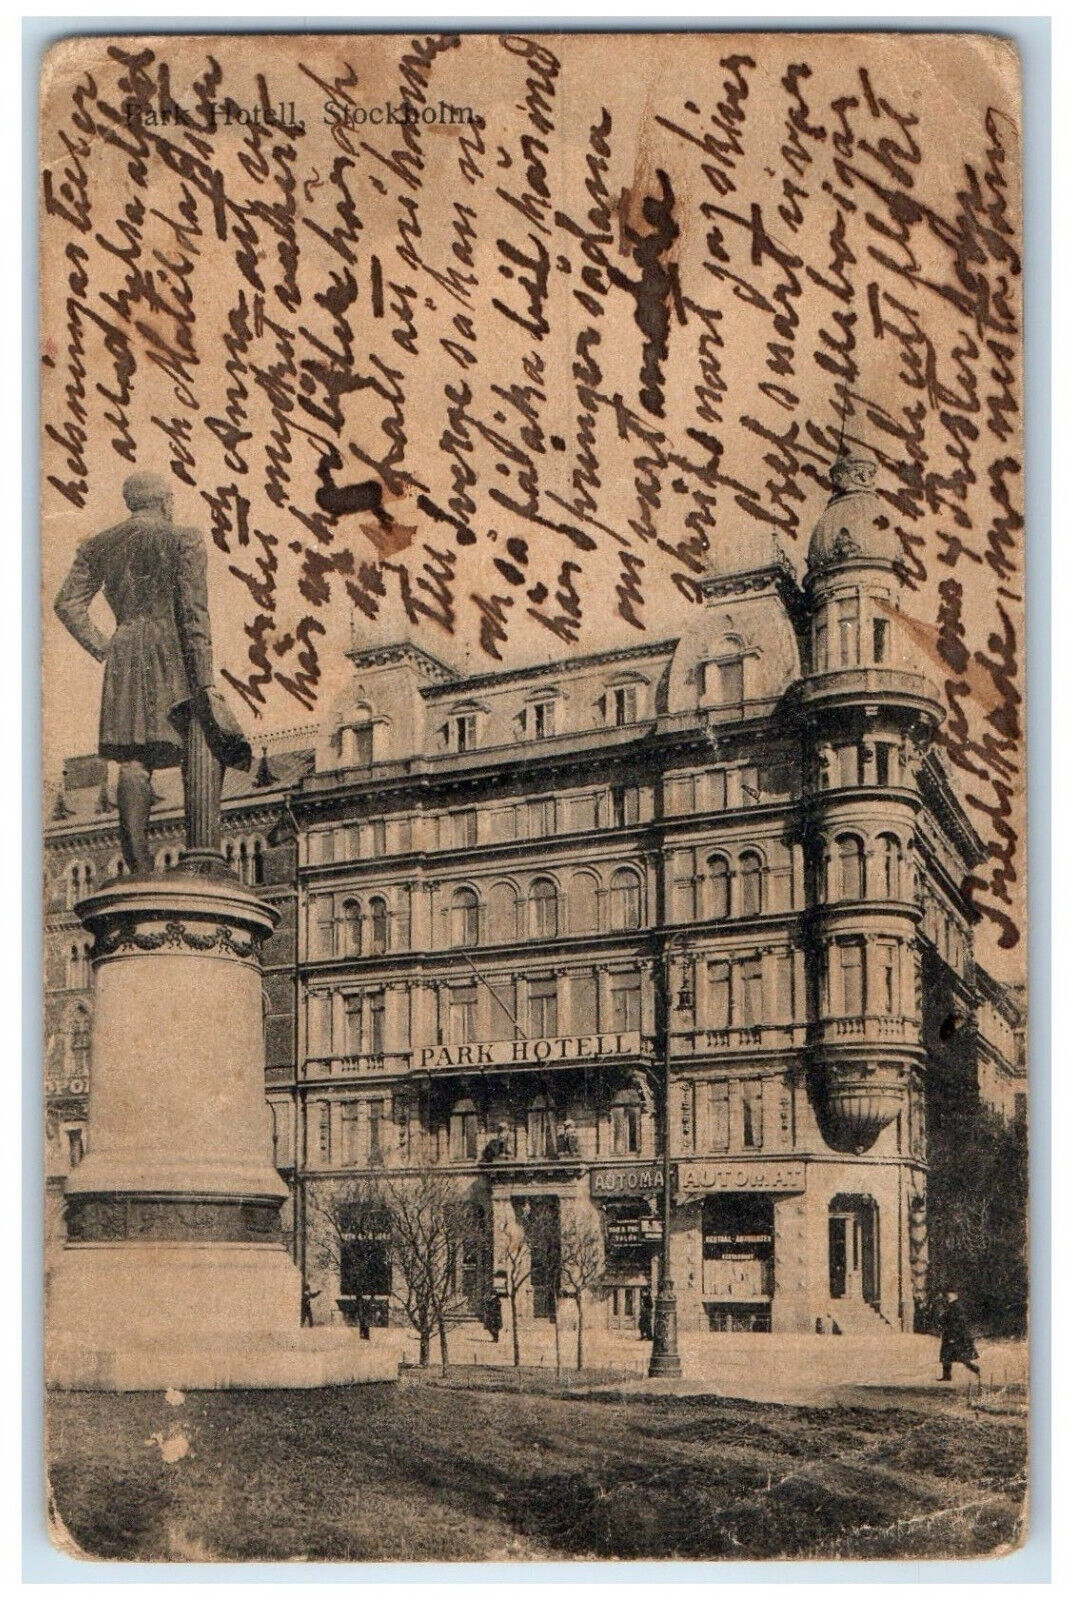 1931 View of Park Hotell Building Entrance Sweden Antique Posted Postcard